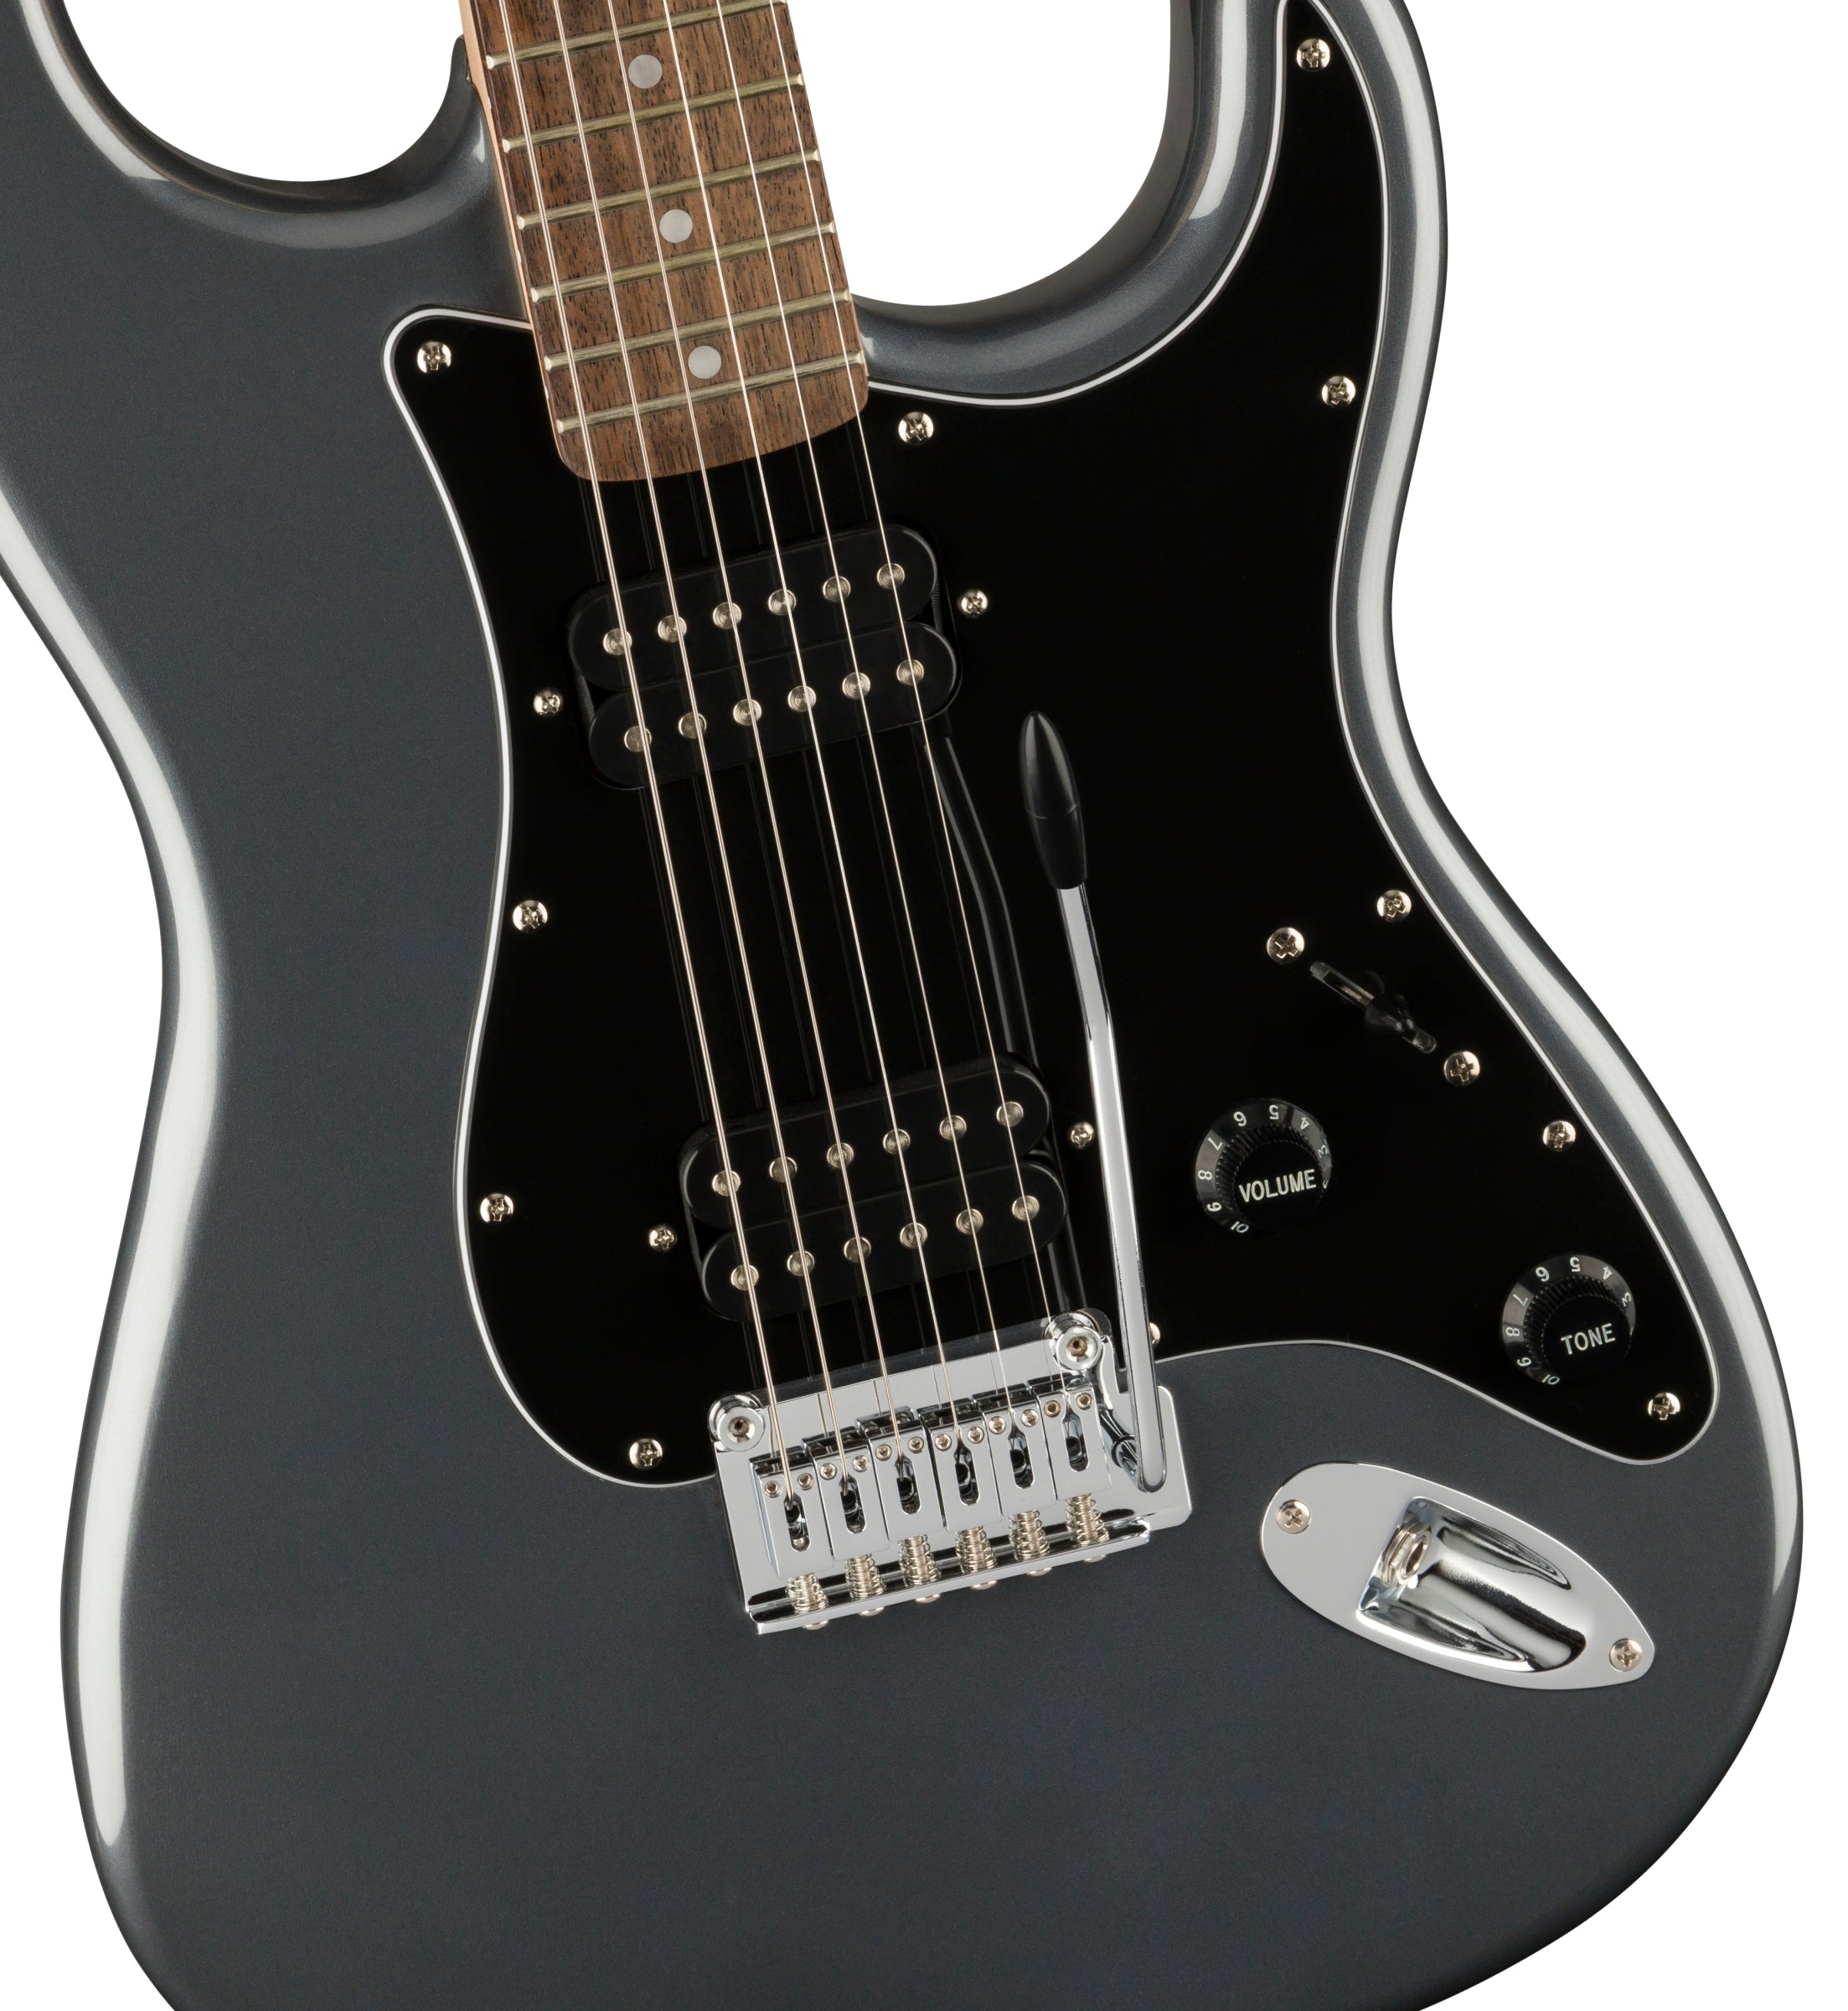 Squier Affinity Series Stratocaster Electric Guitar - Charcoal Frost Metallic